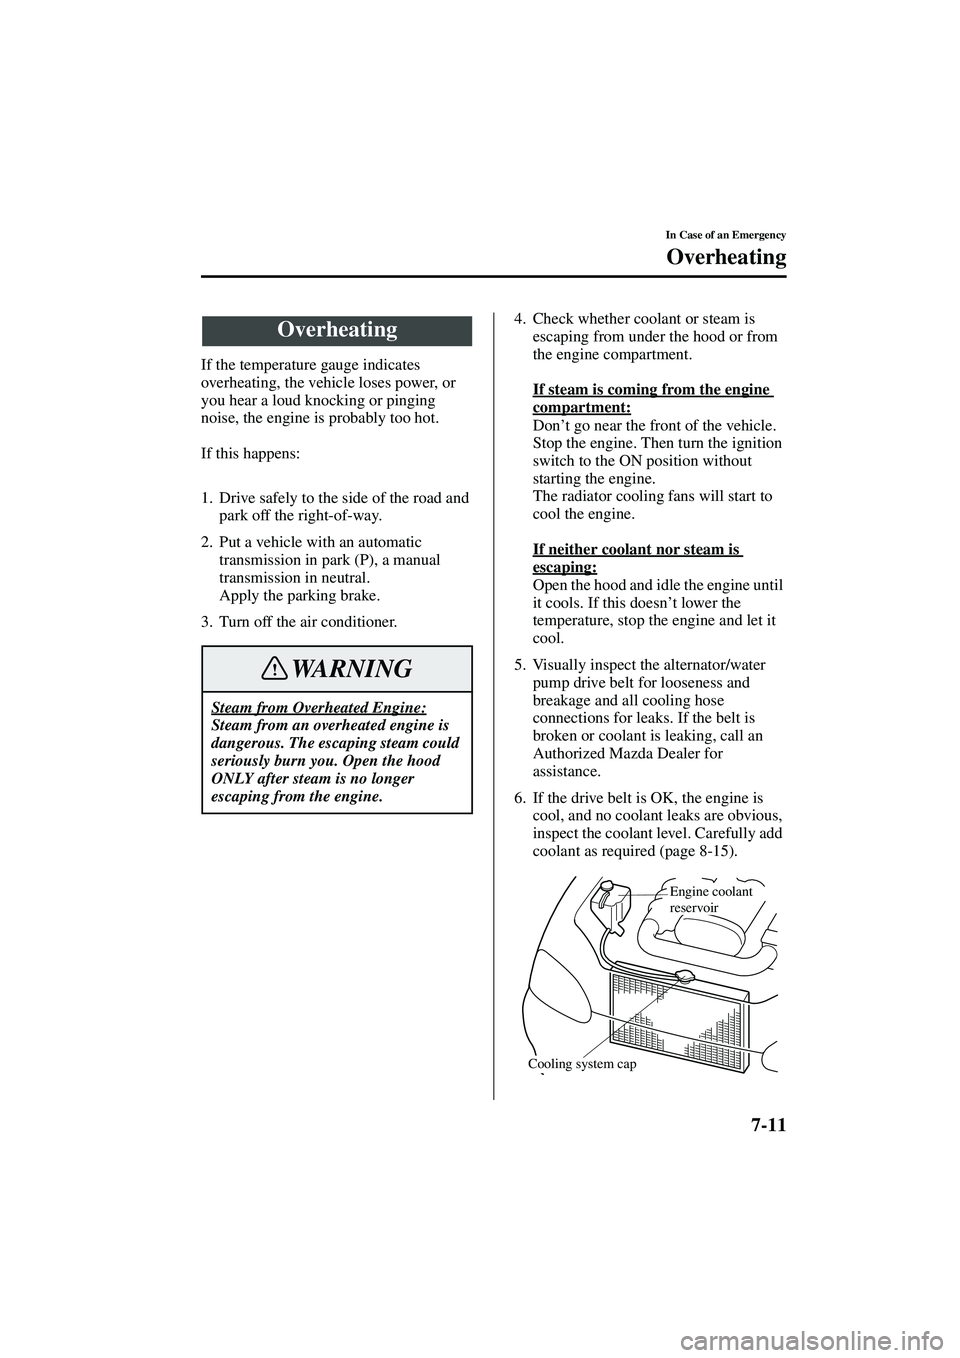 MAZDA MODEL MX-5 MIATA 2003 User Guide 7-11
In Case of an Emergency
Form No. 8R09-EA-02G
Overheating
If the temperature gauge indicates 
overheating, the vehicle loses power, or 
you hear a loud knocking or pinging 
noise, the engine is pr